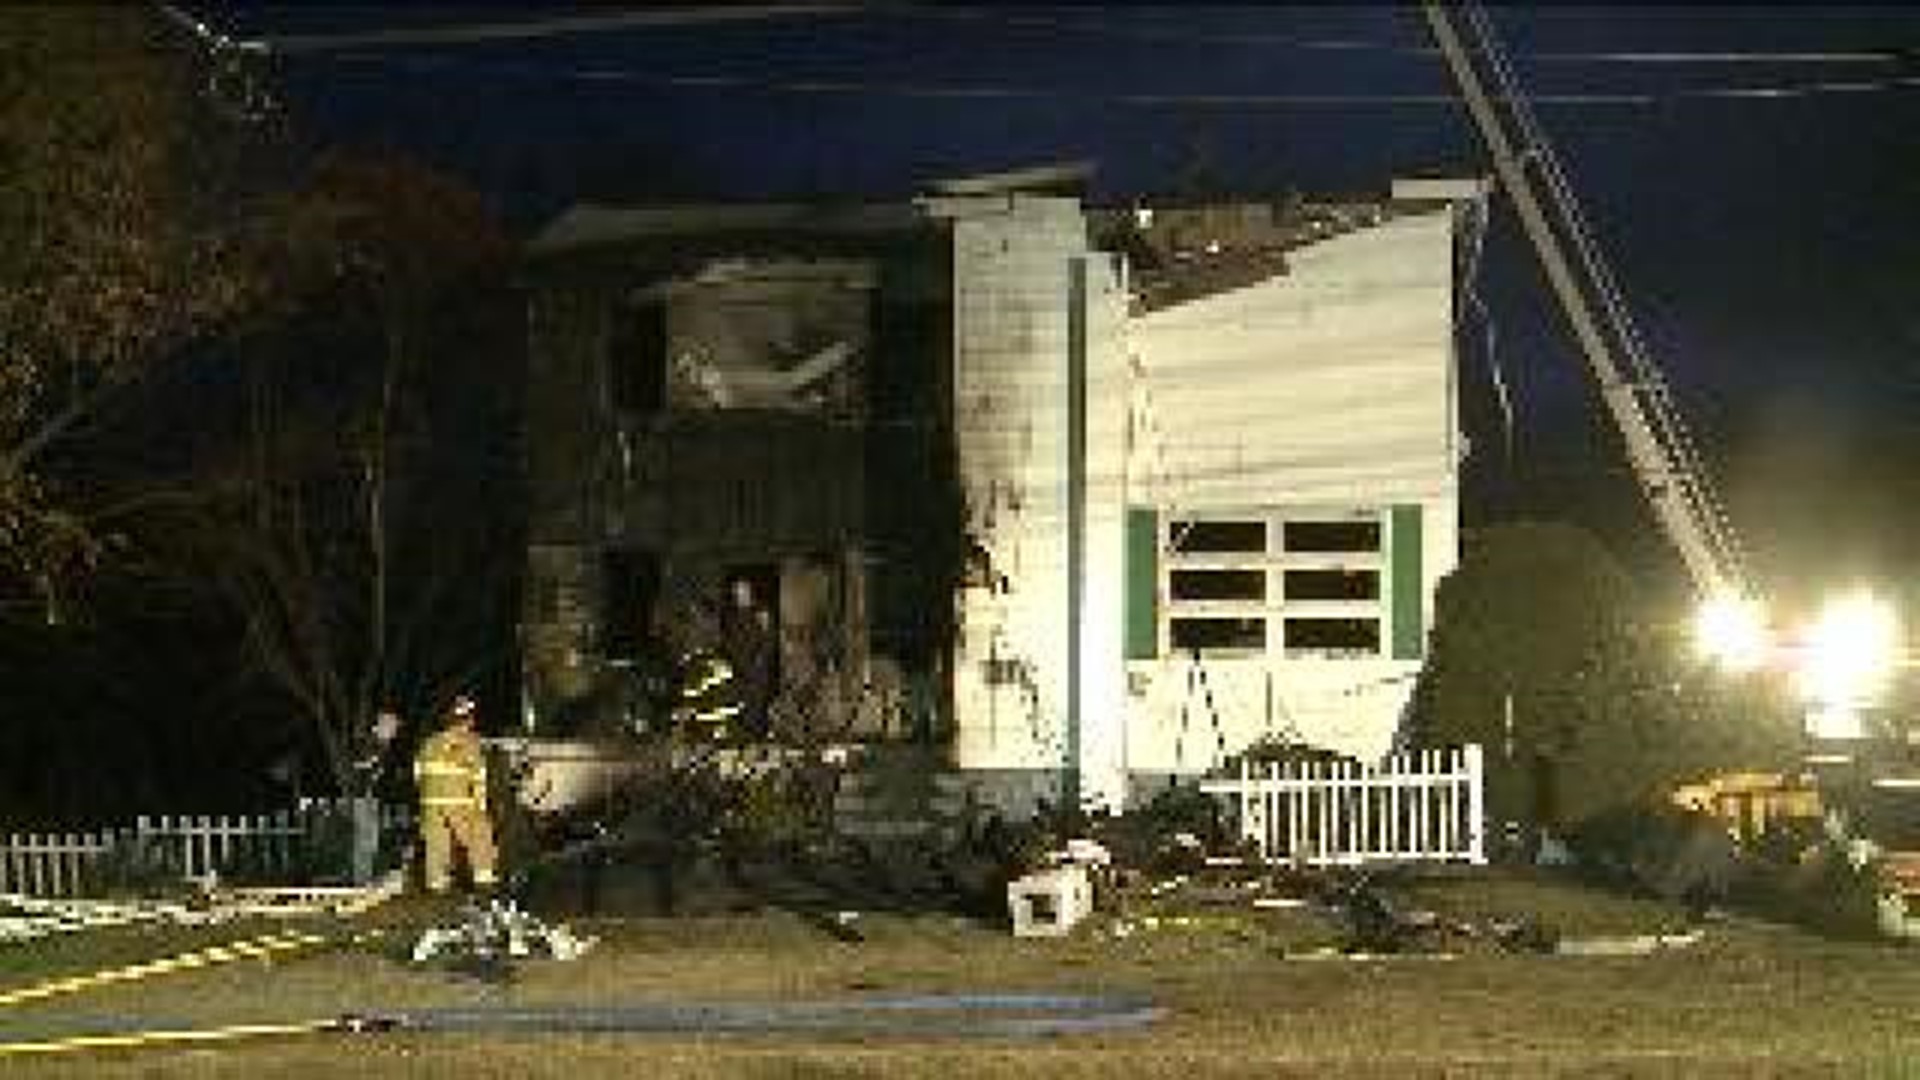 88-Year-Old Man Loses Life in House Fire